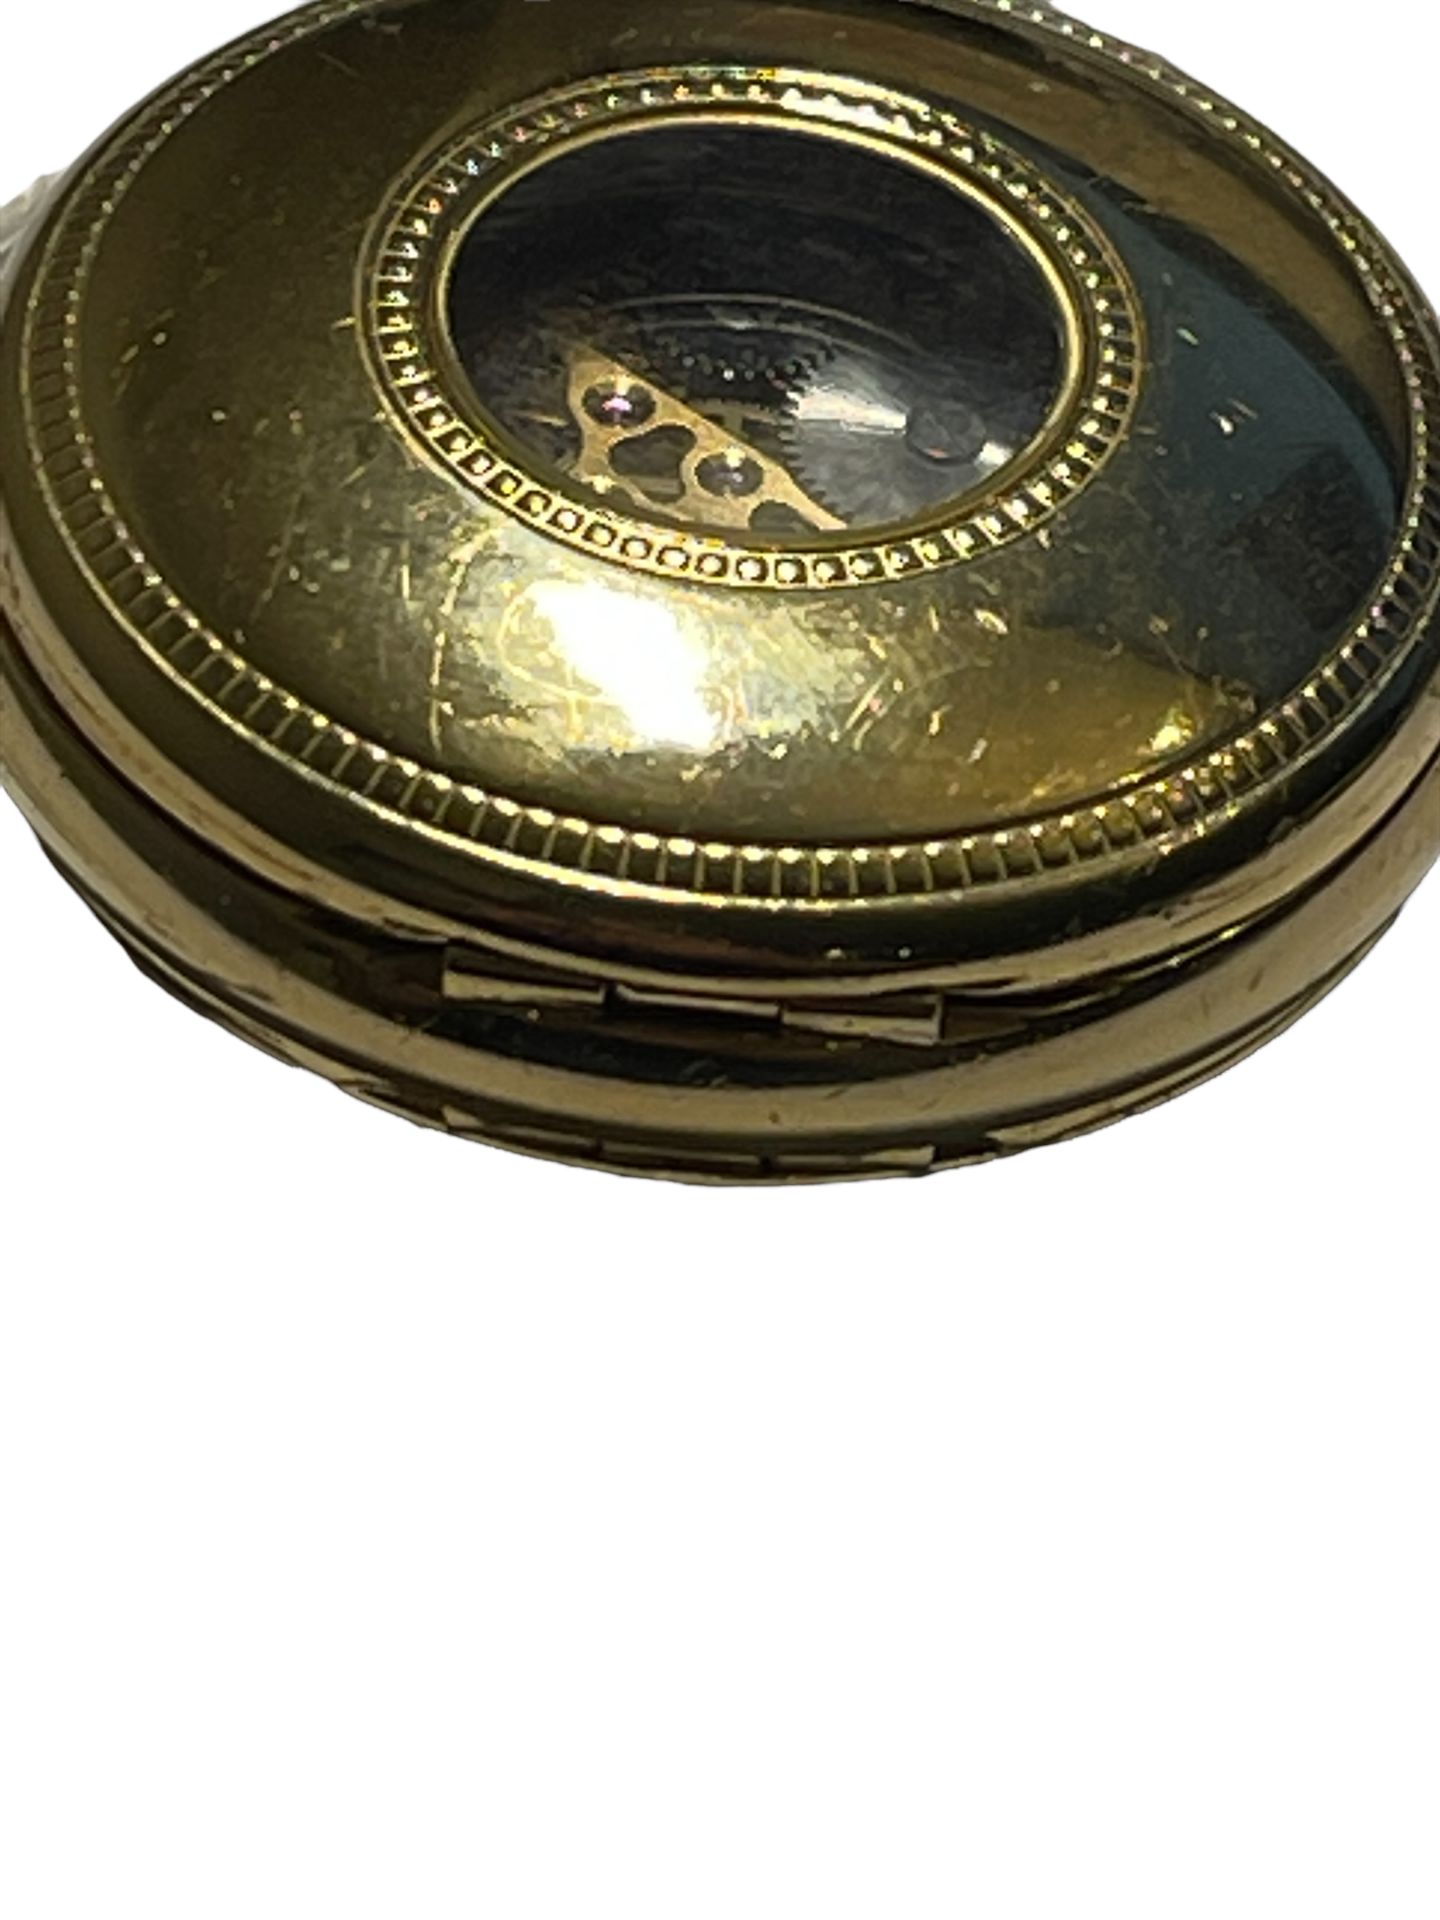 Rotary Gold Plated Mechanical Pocket Watch MP00713/01 RRP £209 - Ex Demo - Image 10 of 11